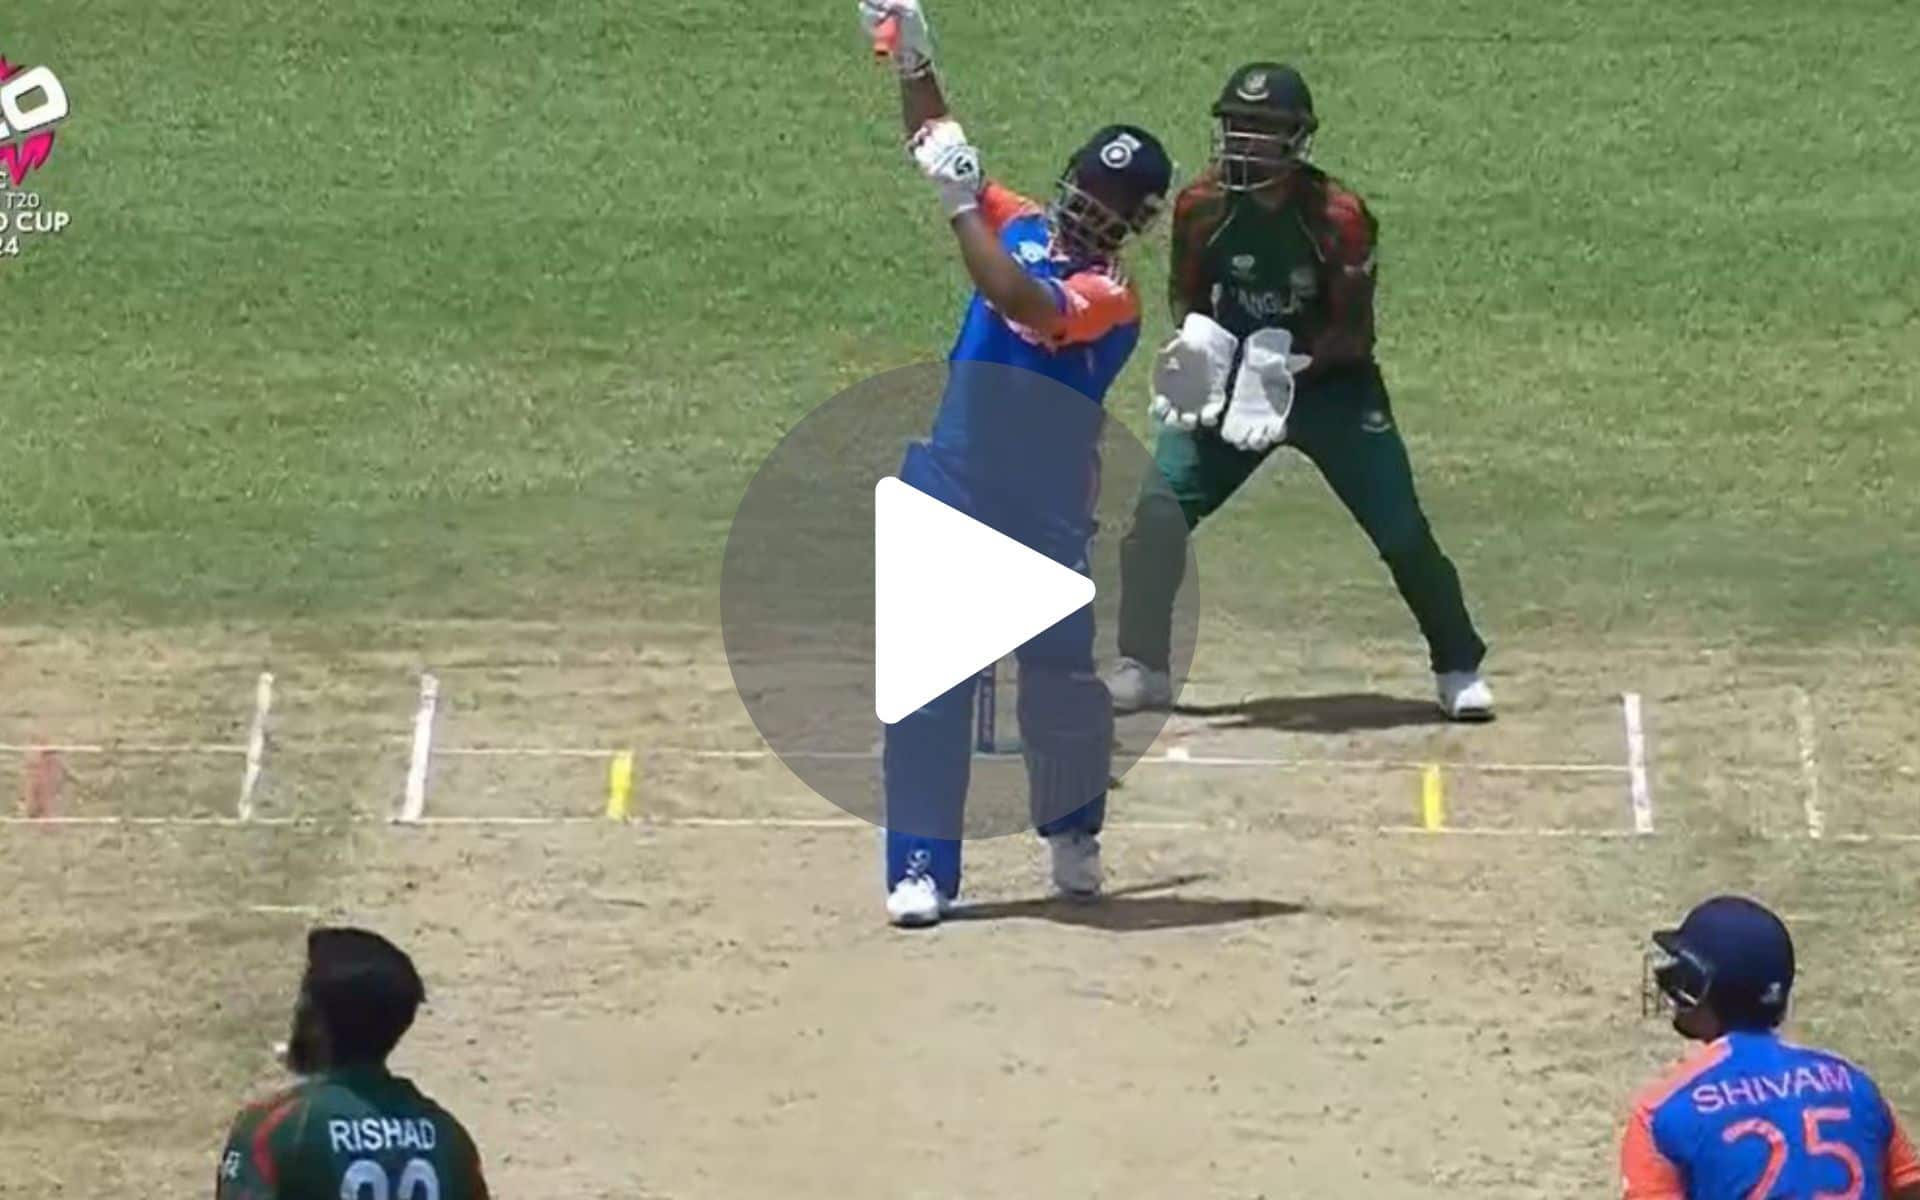 [Watch] Rishabh Pant's 'One-Handed Six' Nearly Goes Out Of The Ground